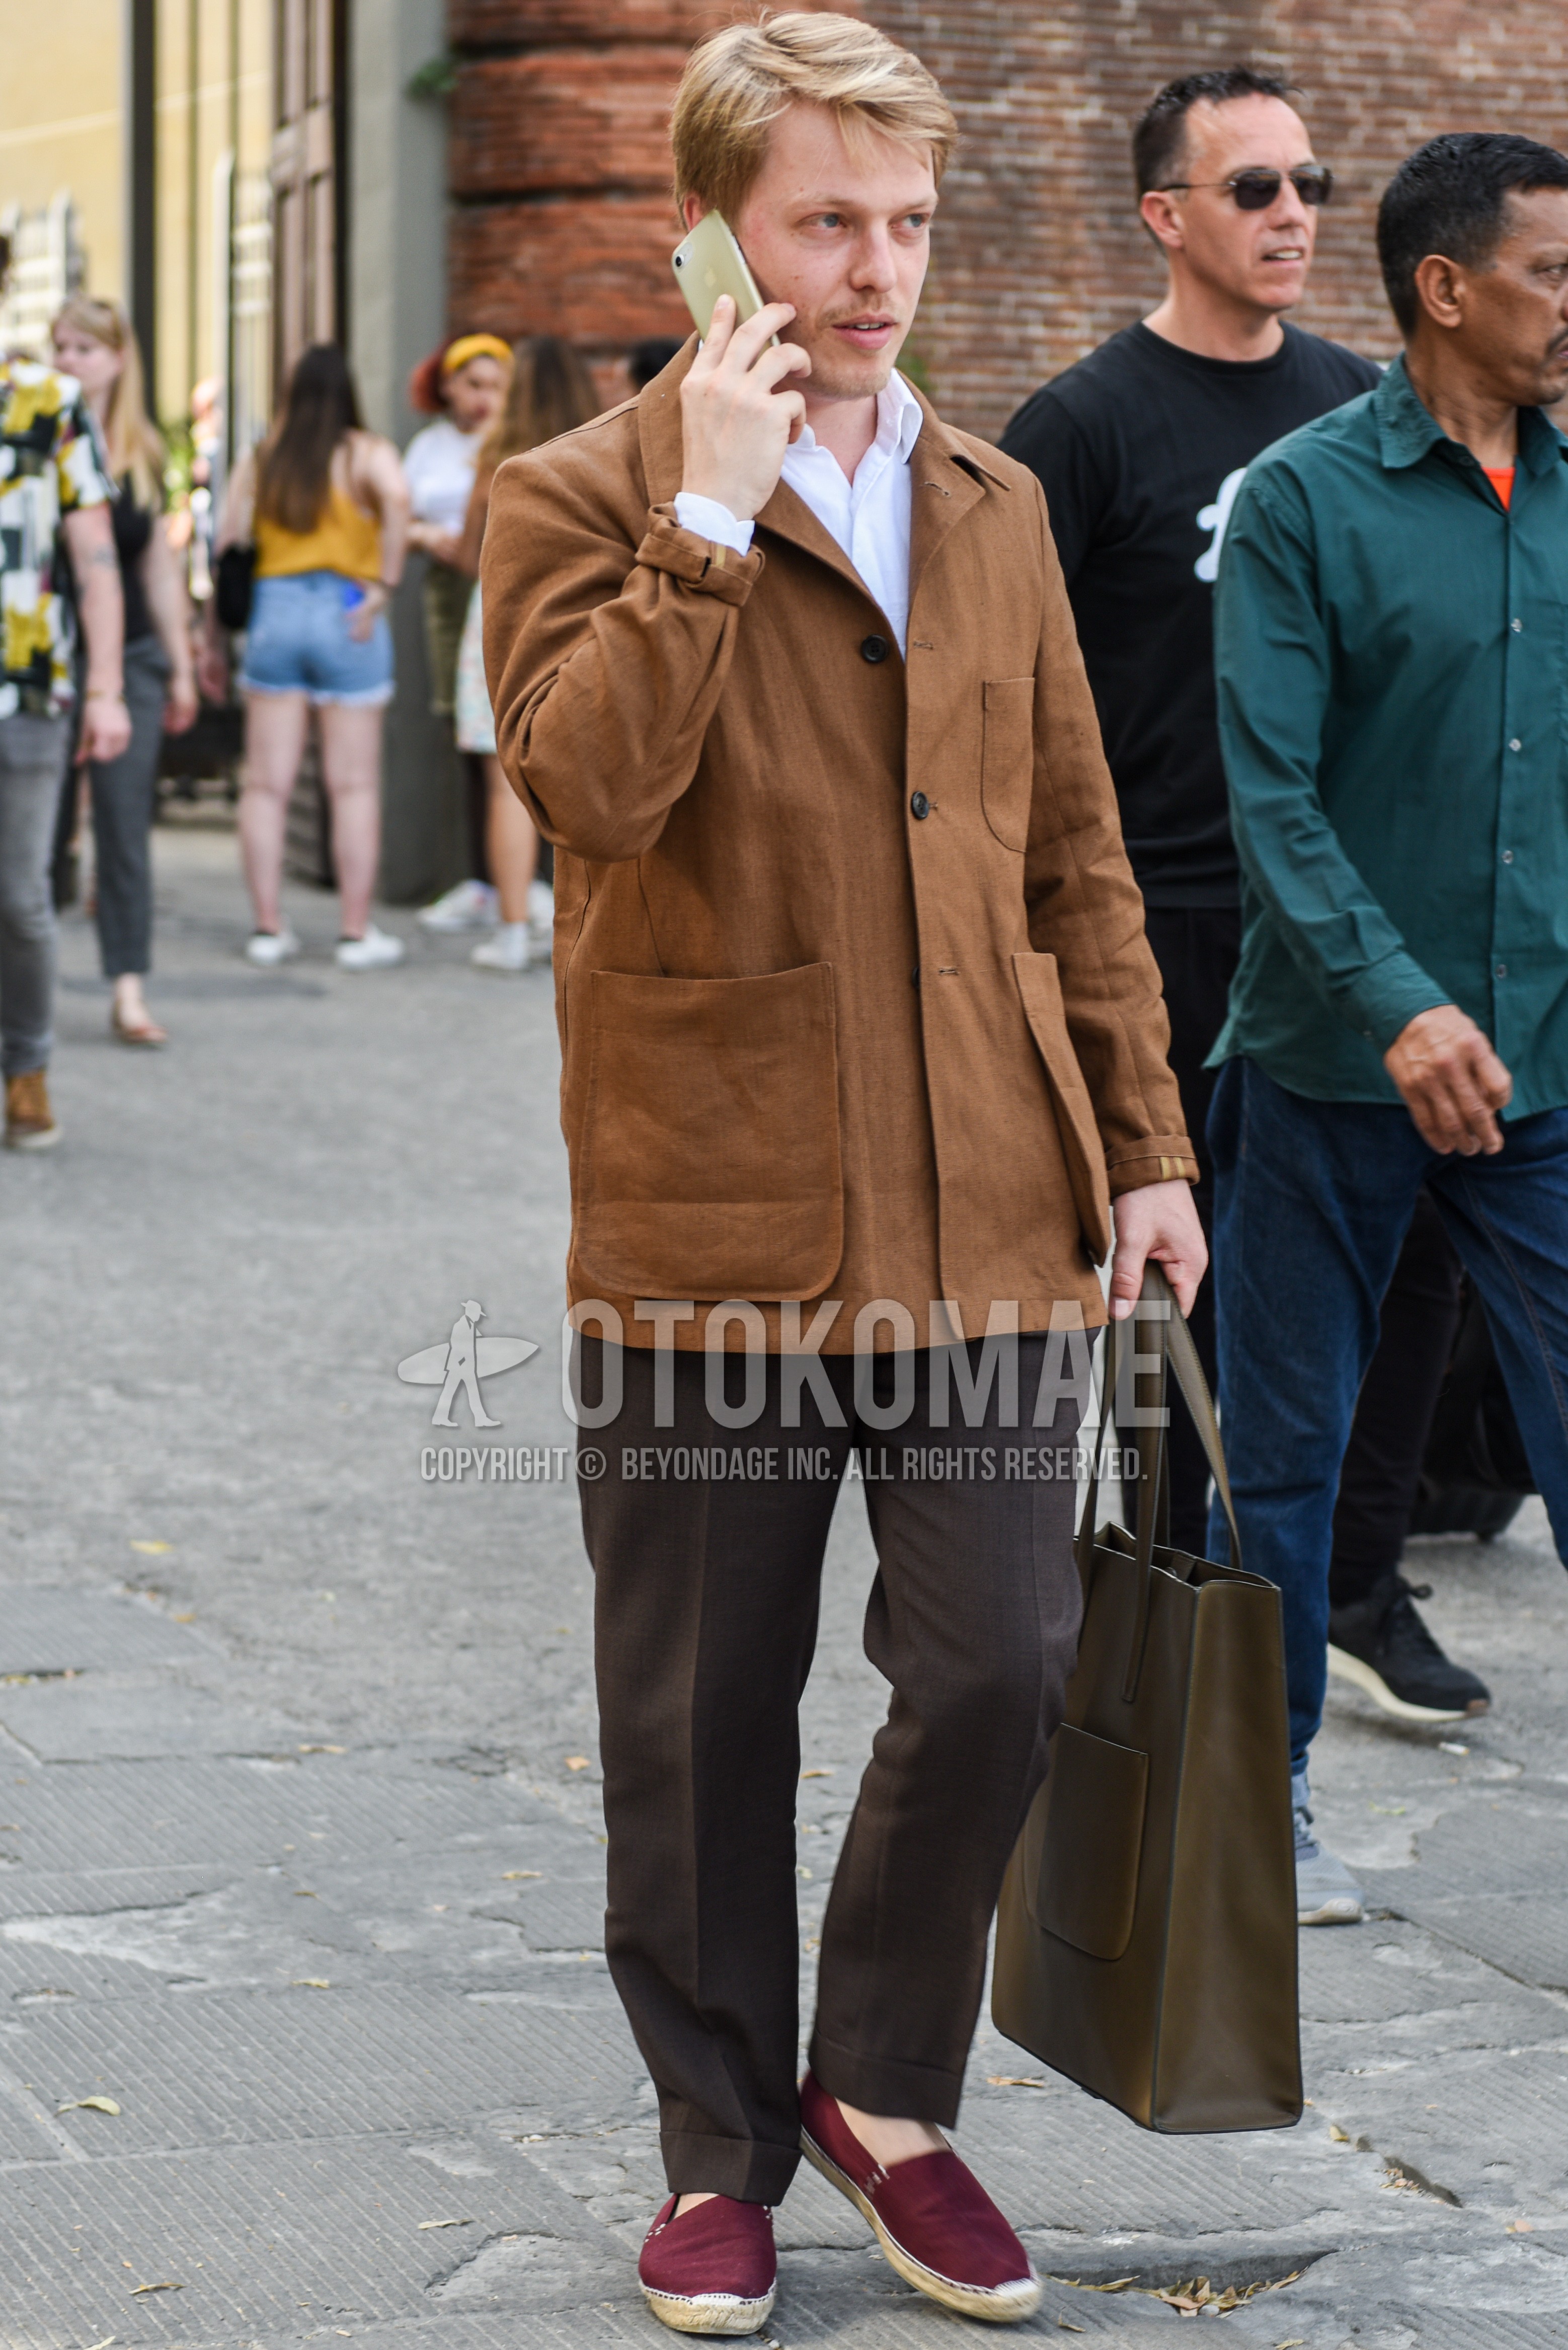 Men's spring autumn outfit with brown plain shirt jacket, white plain shirt, brown plain slacks, red slip-on sneakers, olive green plain tote bag.